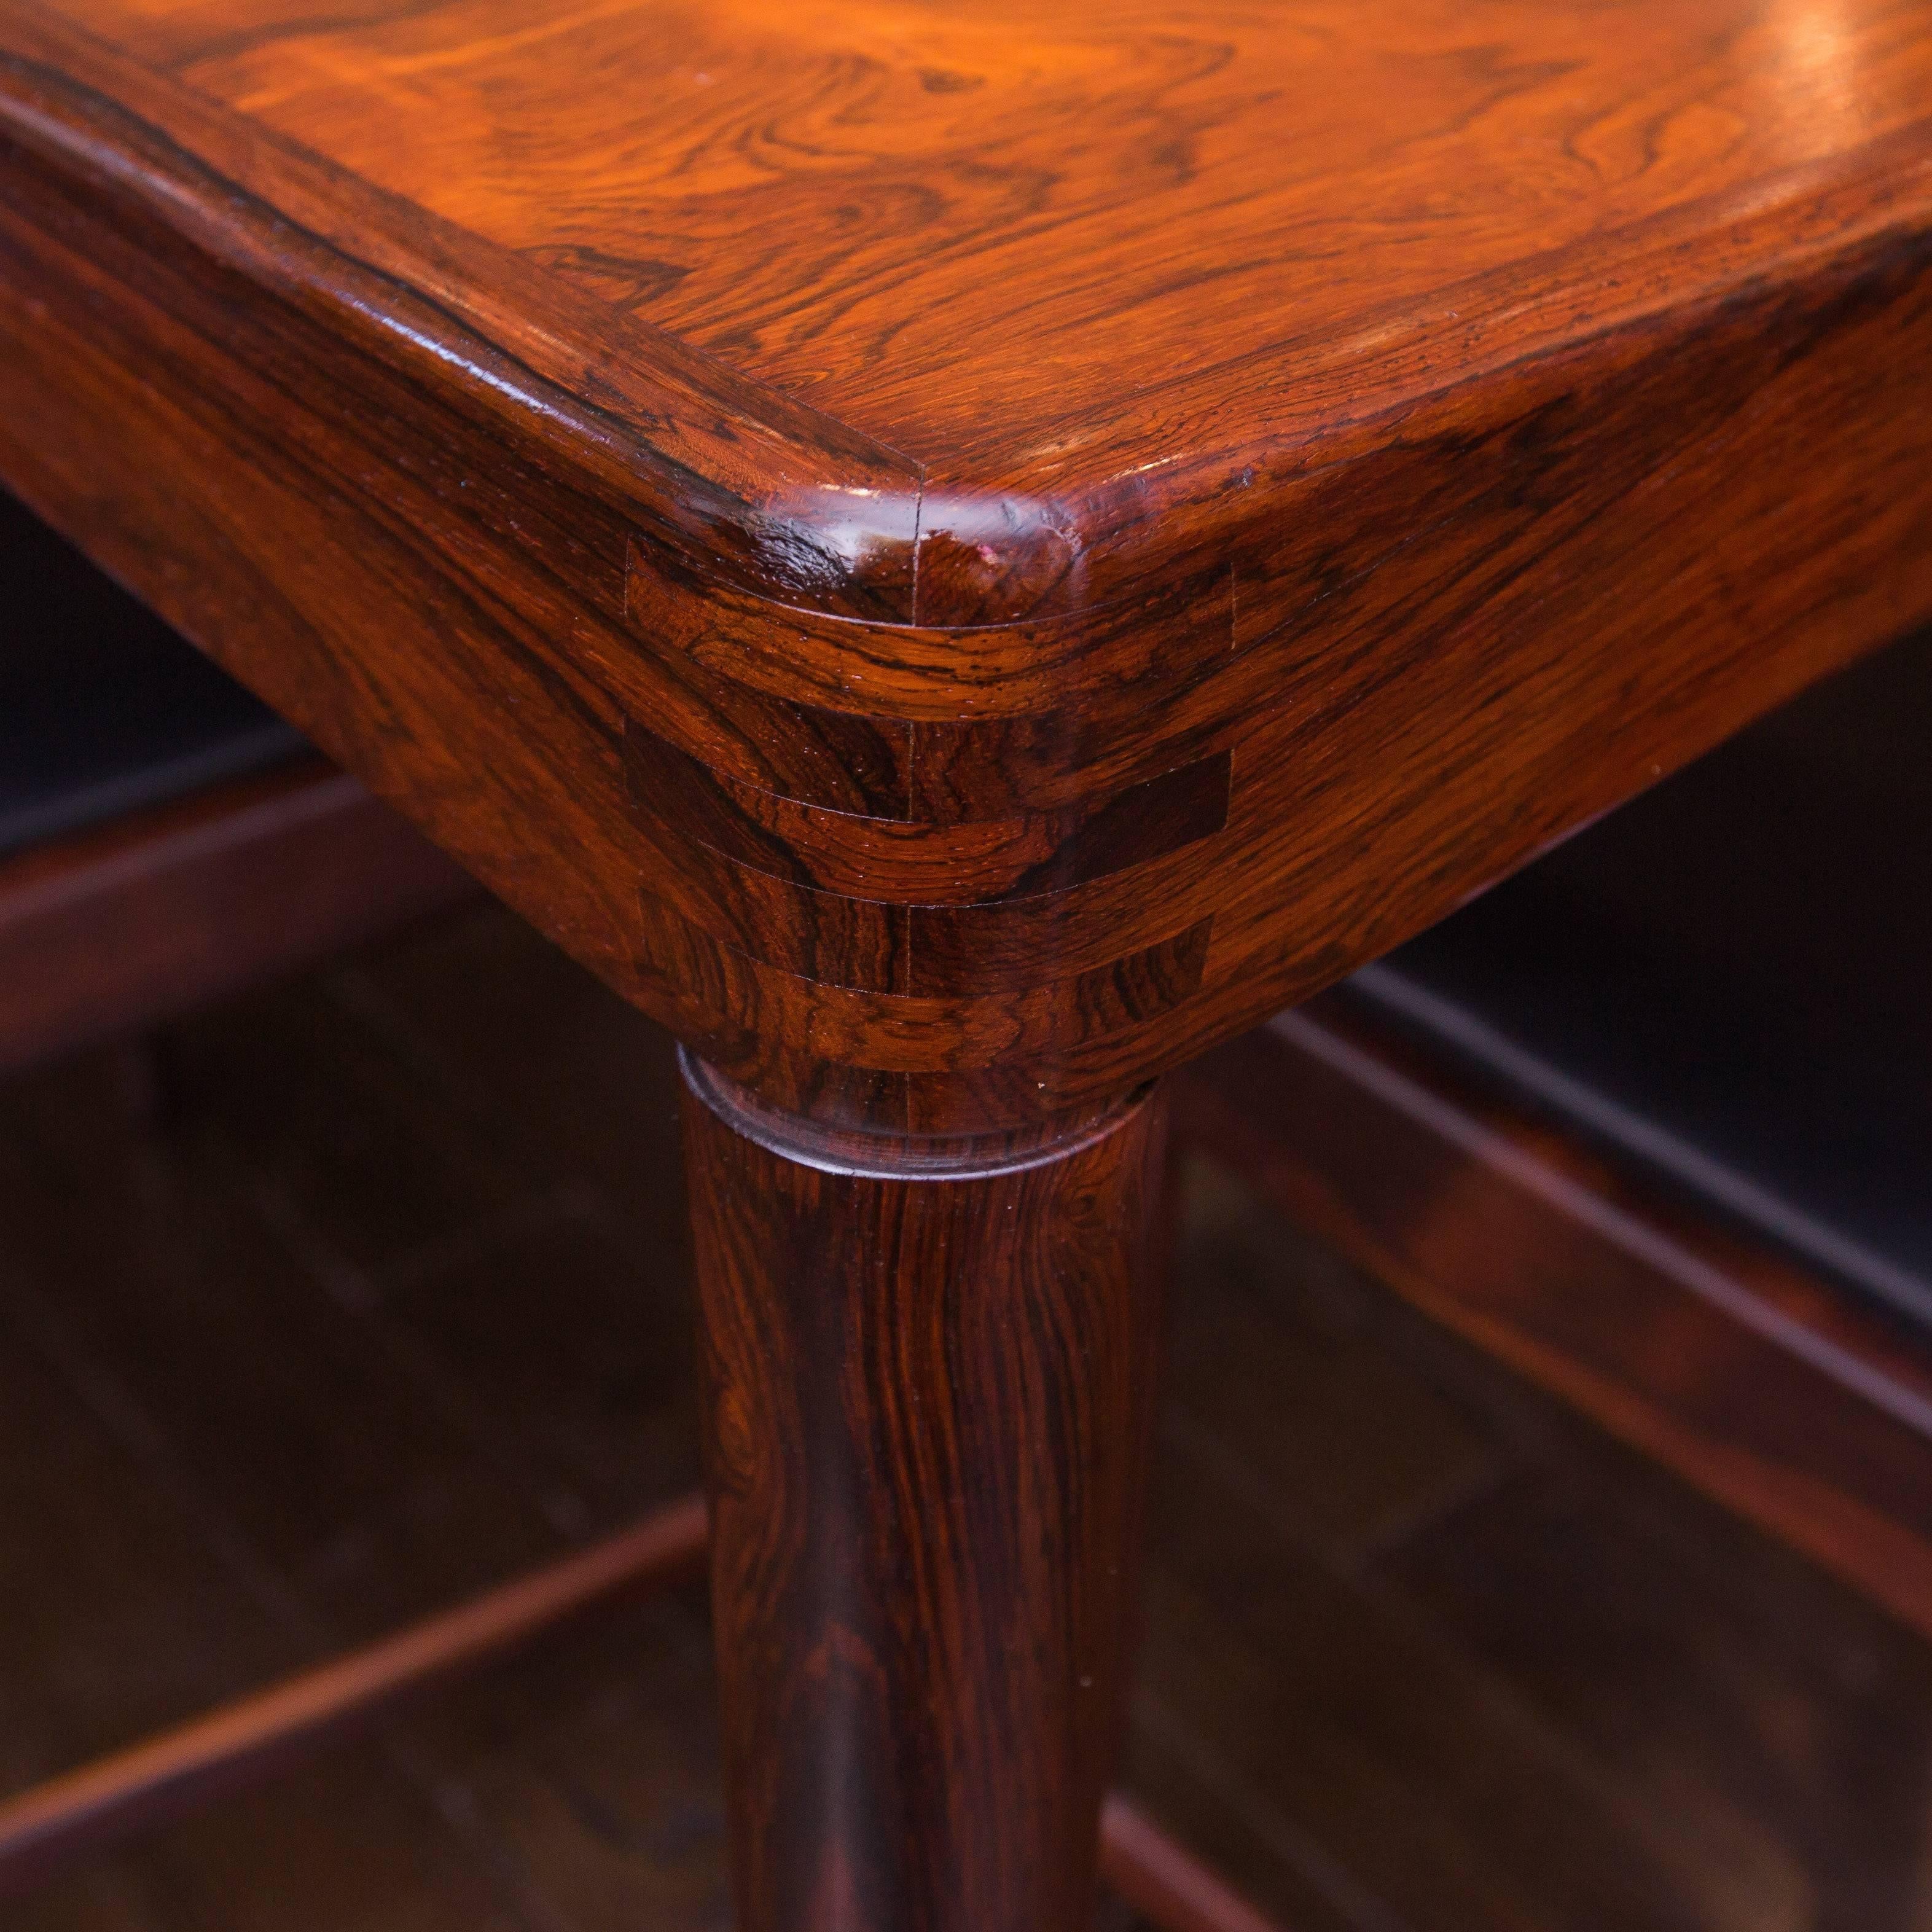 Fresh out of the original owner's estate where it has always been covered when not in use is this beautiful rosewood table with one 23.75